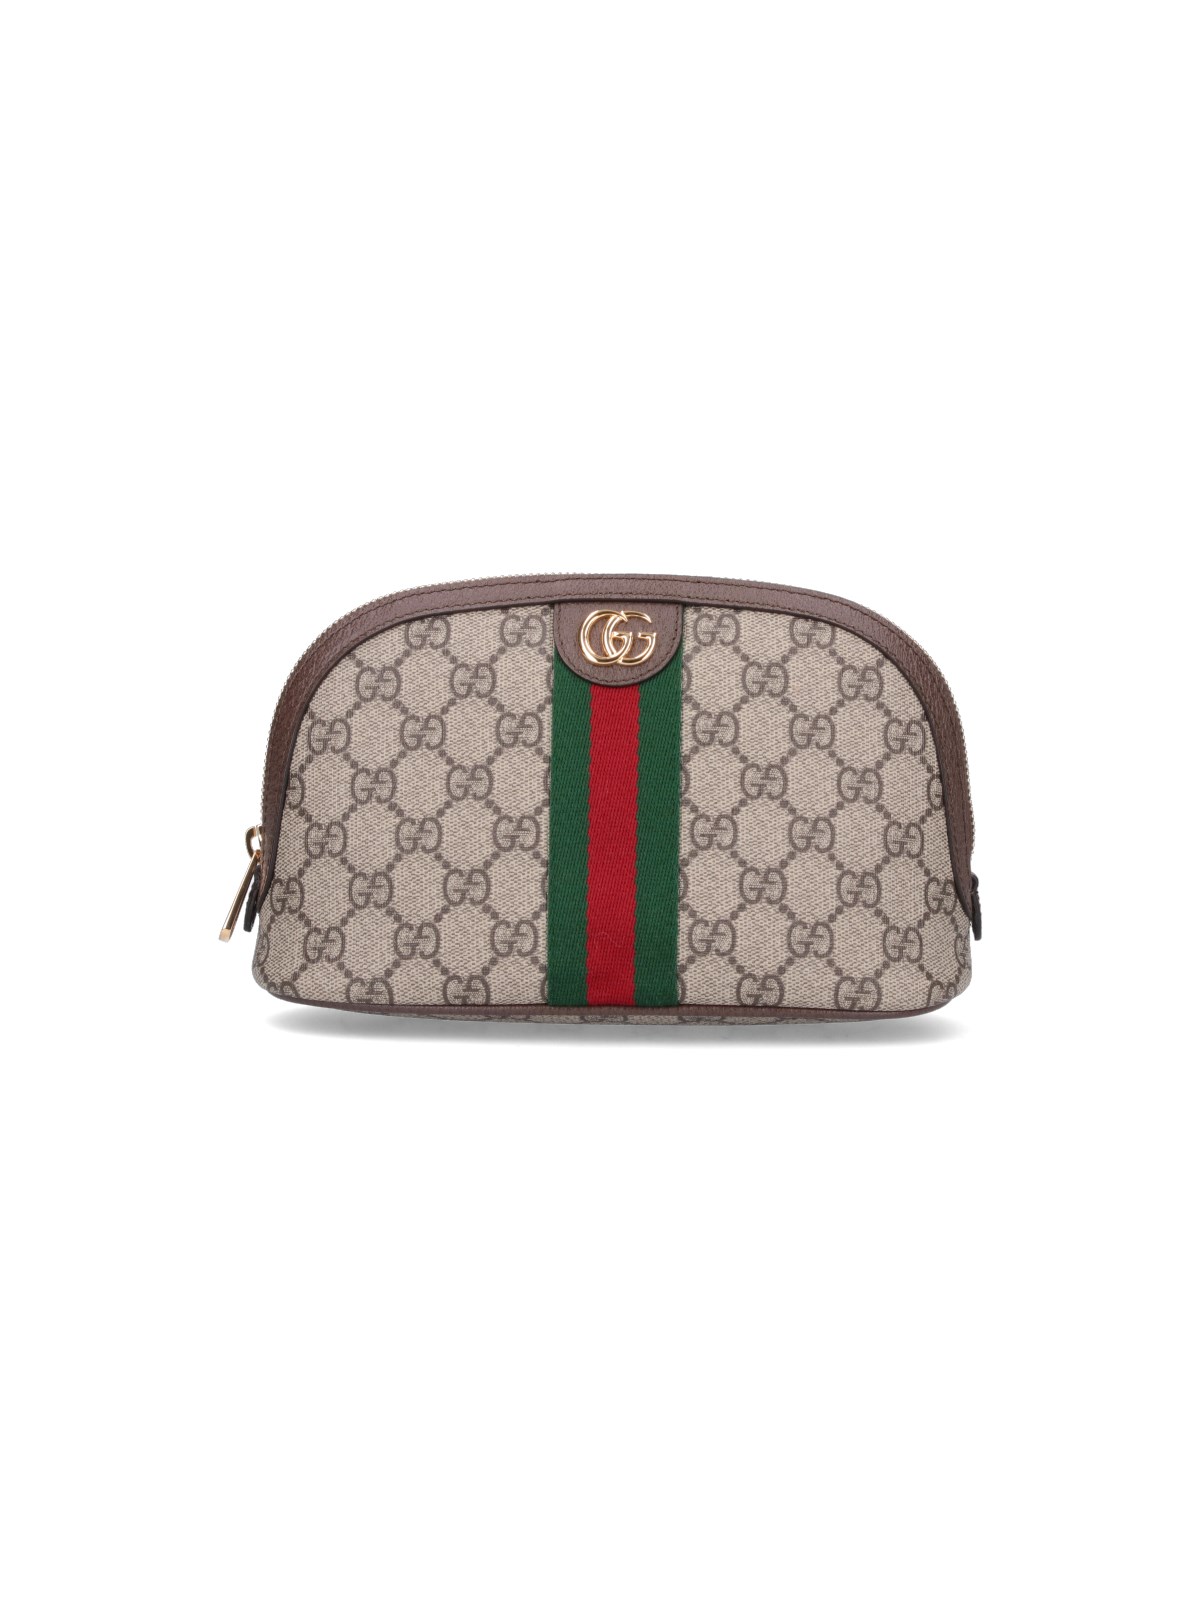 GUCCI LARGE POUCH "OPHIDIA"